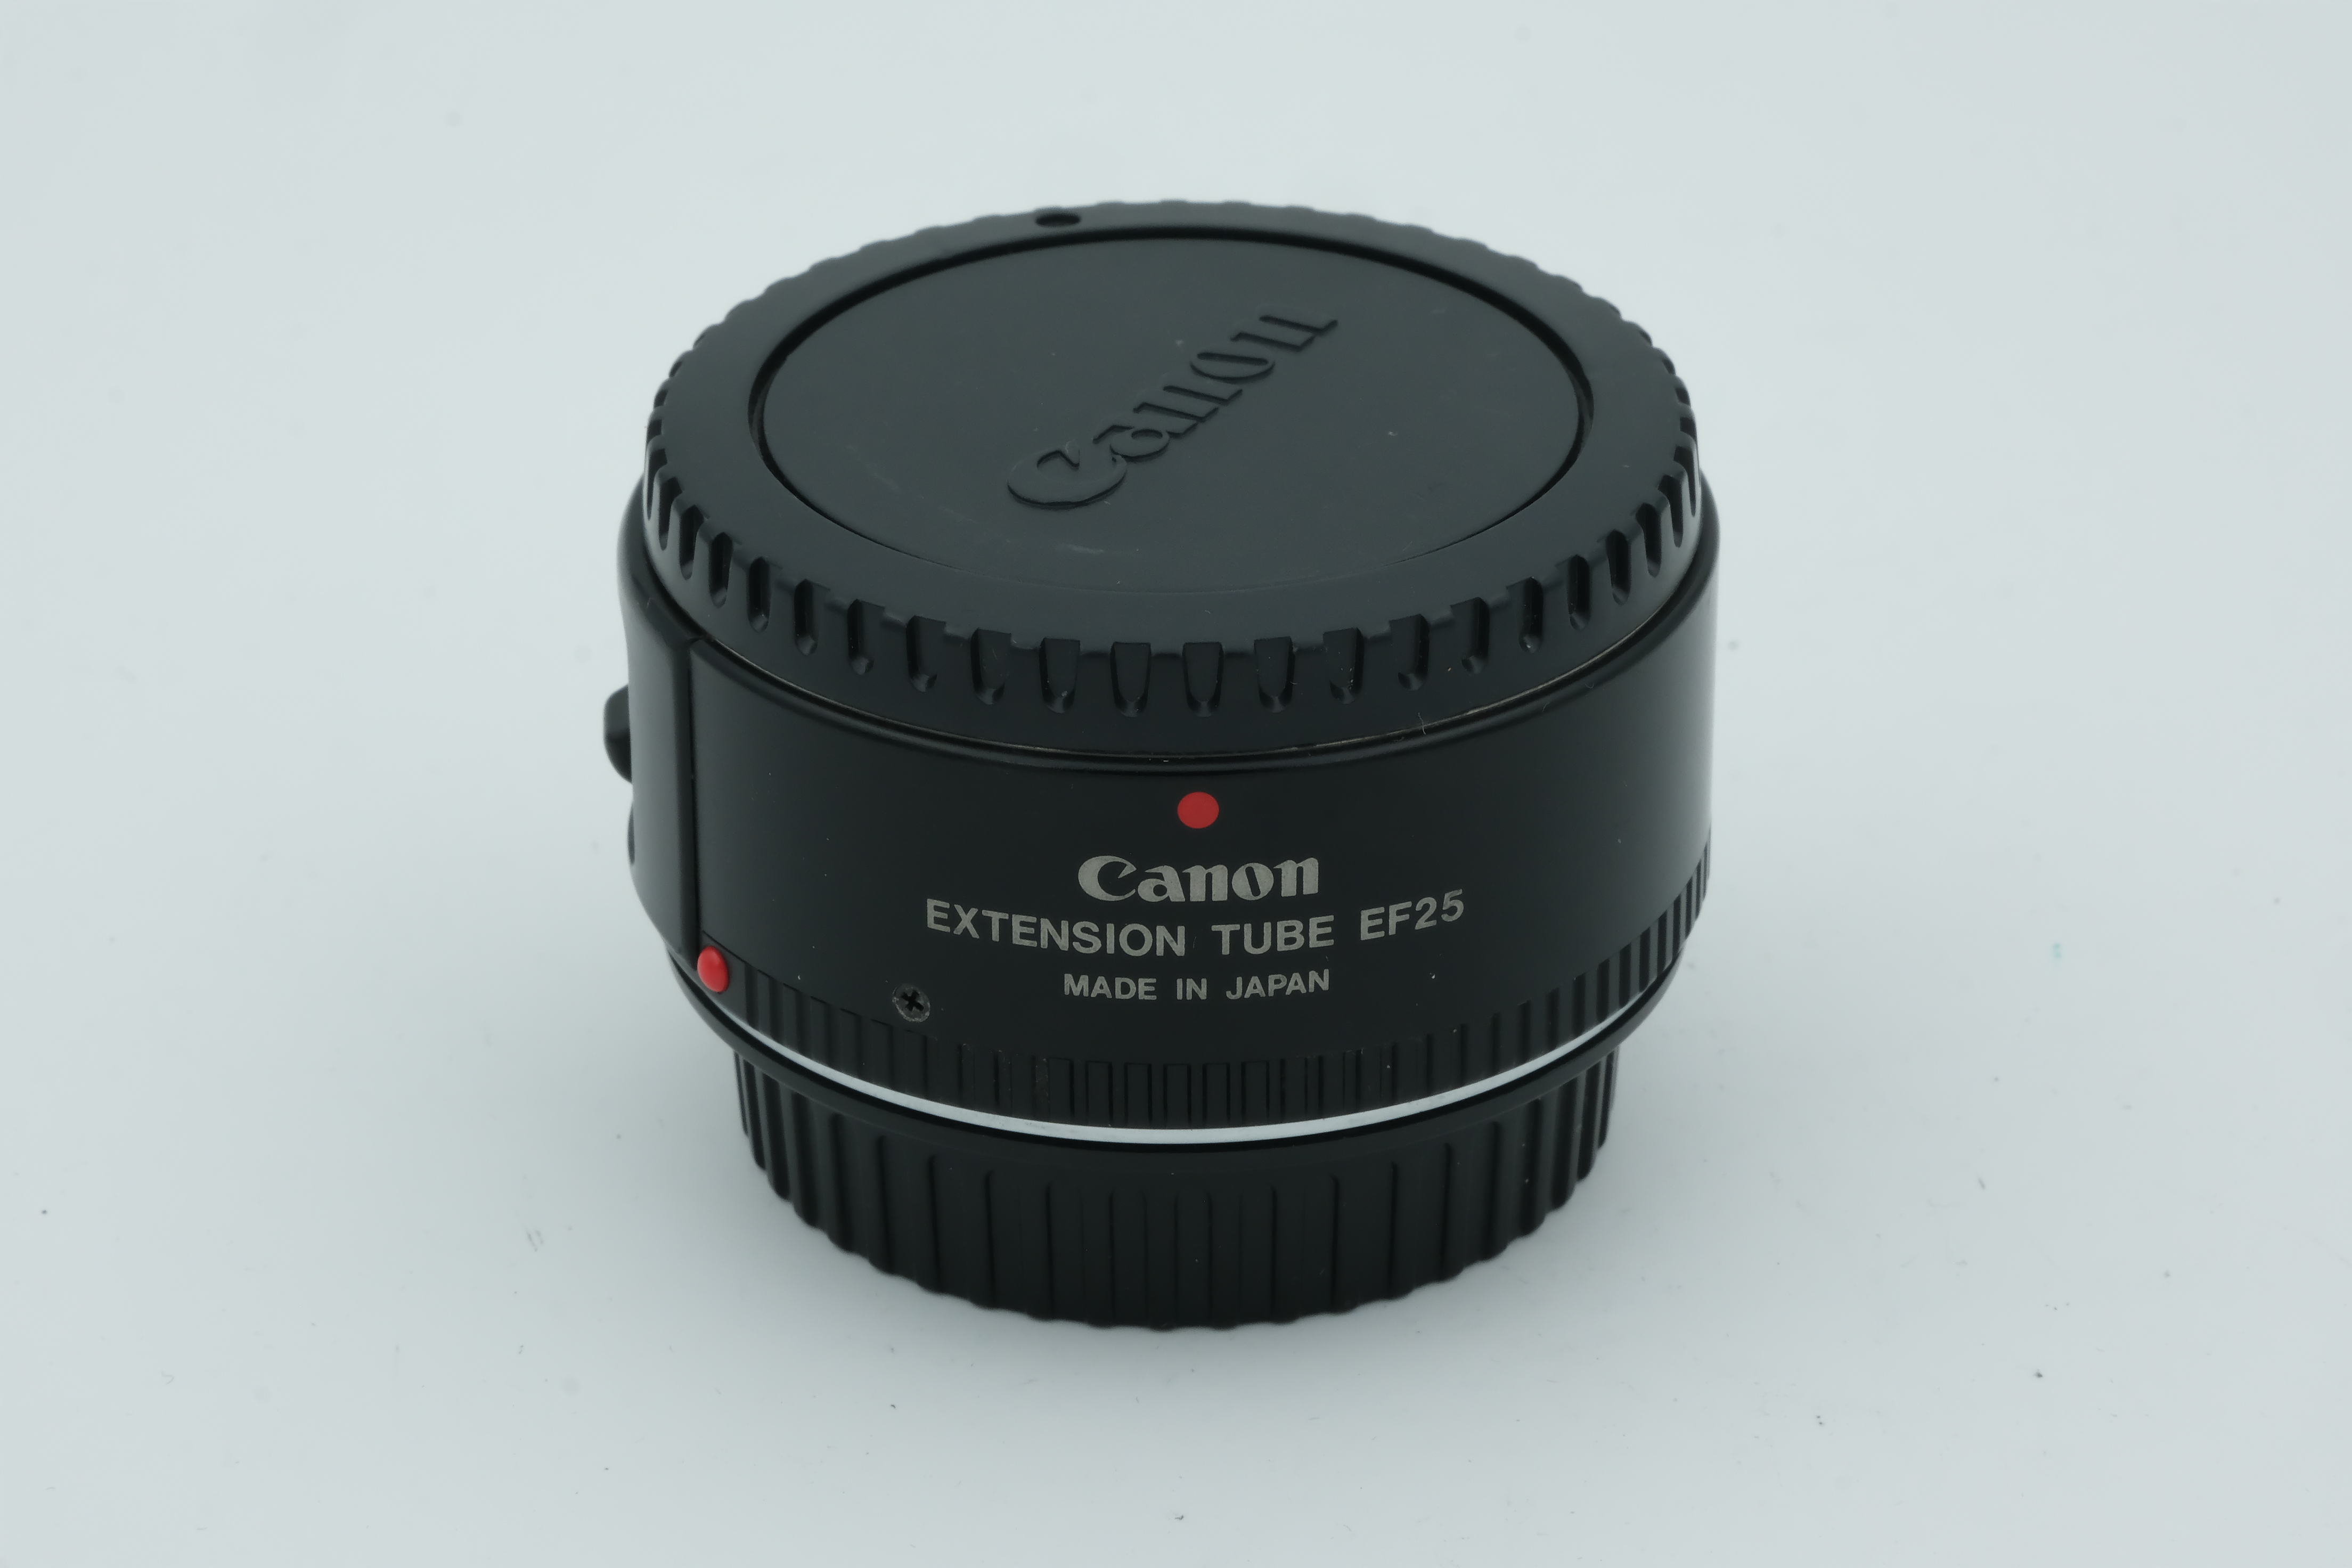 Canon EF25 Extension Tube